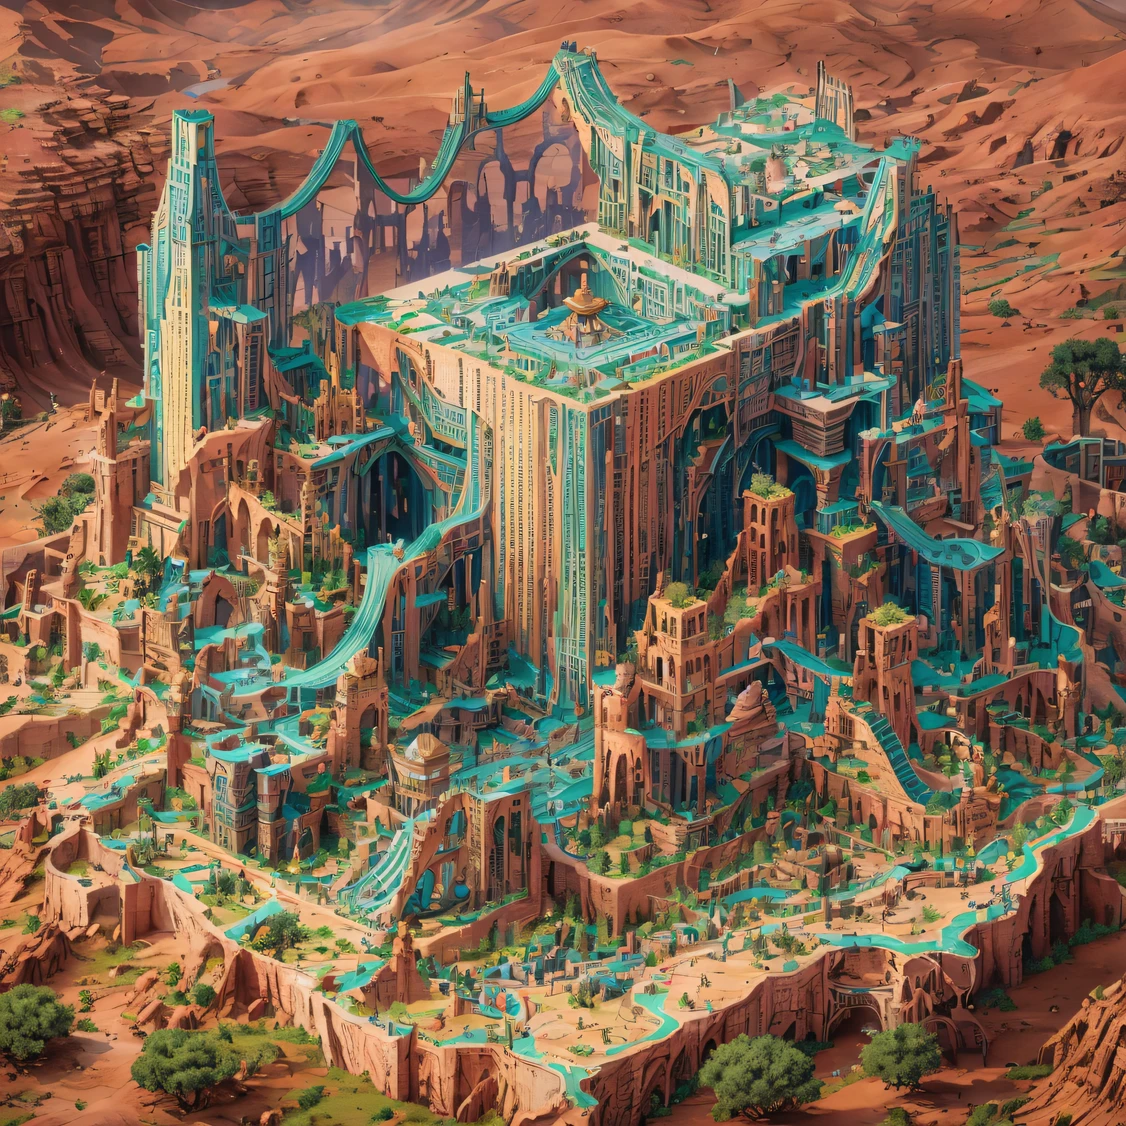 Maze 32K,Realistic painting_book_cover:1.3,  1:60 miniatures，Go to the maze，CG Giant, Smooth CG art, Realistic. Cheng Yi, Forced masterpiece，monument valley，Geometry Cute secret rendering, Rendu portrait 8k, Render character art 8 K, Kawaii realistic portrait， tmasterpiece，monument valley，geomerty（Linen batik scarf）， Angry fighting stance， looking at the ground， Batik linen bandana， Chinese python pattern long-sleeved garment，Uncharted（Abstract propylene splash：1.2）， Dark clouds lightning background，tmasterpiece，Monument Valley geometry（realisticlying：1.4），tmasterpiece，monument valley，geomerty，Telephoto lens high， A high resolution， the detail， RAW photogr， Sharp Re， Nikon D850 Film Stock Photo by Jefferies Lee 4 Kodak Portra 400 Camera F1.6 shots, Rich colors, ultra-realistic vivid textures, Dramatic lighting，8K quality, Girls，Backstreets， Dark clouds lightning background masterpiece，monument valley，geomerty（realisticlying：1.4），Black color hair，tmasterpiece，monument valley，Geometric secrets， RAW photogr， Sharp Re， Nikon D850 Film Stock Photo by Jefferies Lee 4 Kodak Portra 400 Camera F1.6 shots, Rich colors, ultra-realistic vivid textures, Drama light film CG agency，Tropical canyon battle scene、Chinese big breasts、Vintage trench coat、three kingdom、ember、100 people、Faraway view、intense battles、high detal、masuter piece、NSFW，Multi-layered long-sleeved gauze garment，Quick-drying vest，Colorful cotton and linen sweater，Red and black snake cloak cloak，Doomsday ruins（Uncharted）Climb the streets（（（Miniatures）））tmasterpiece，monument valley，geomerty